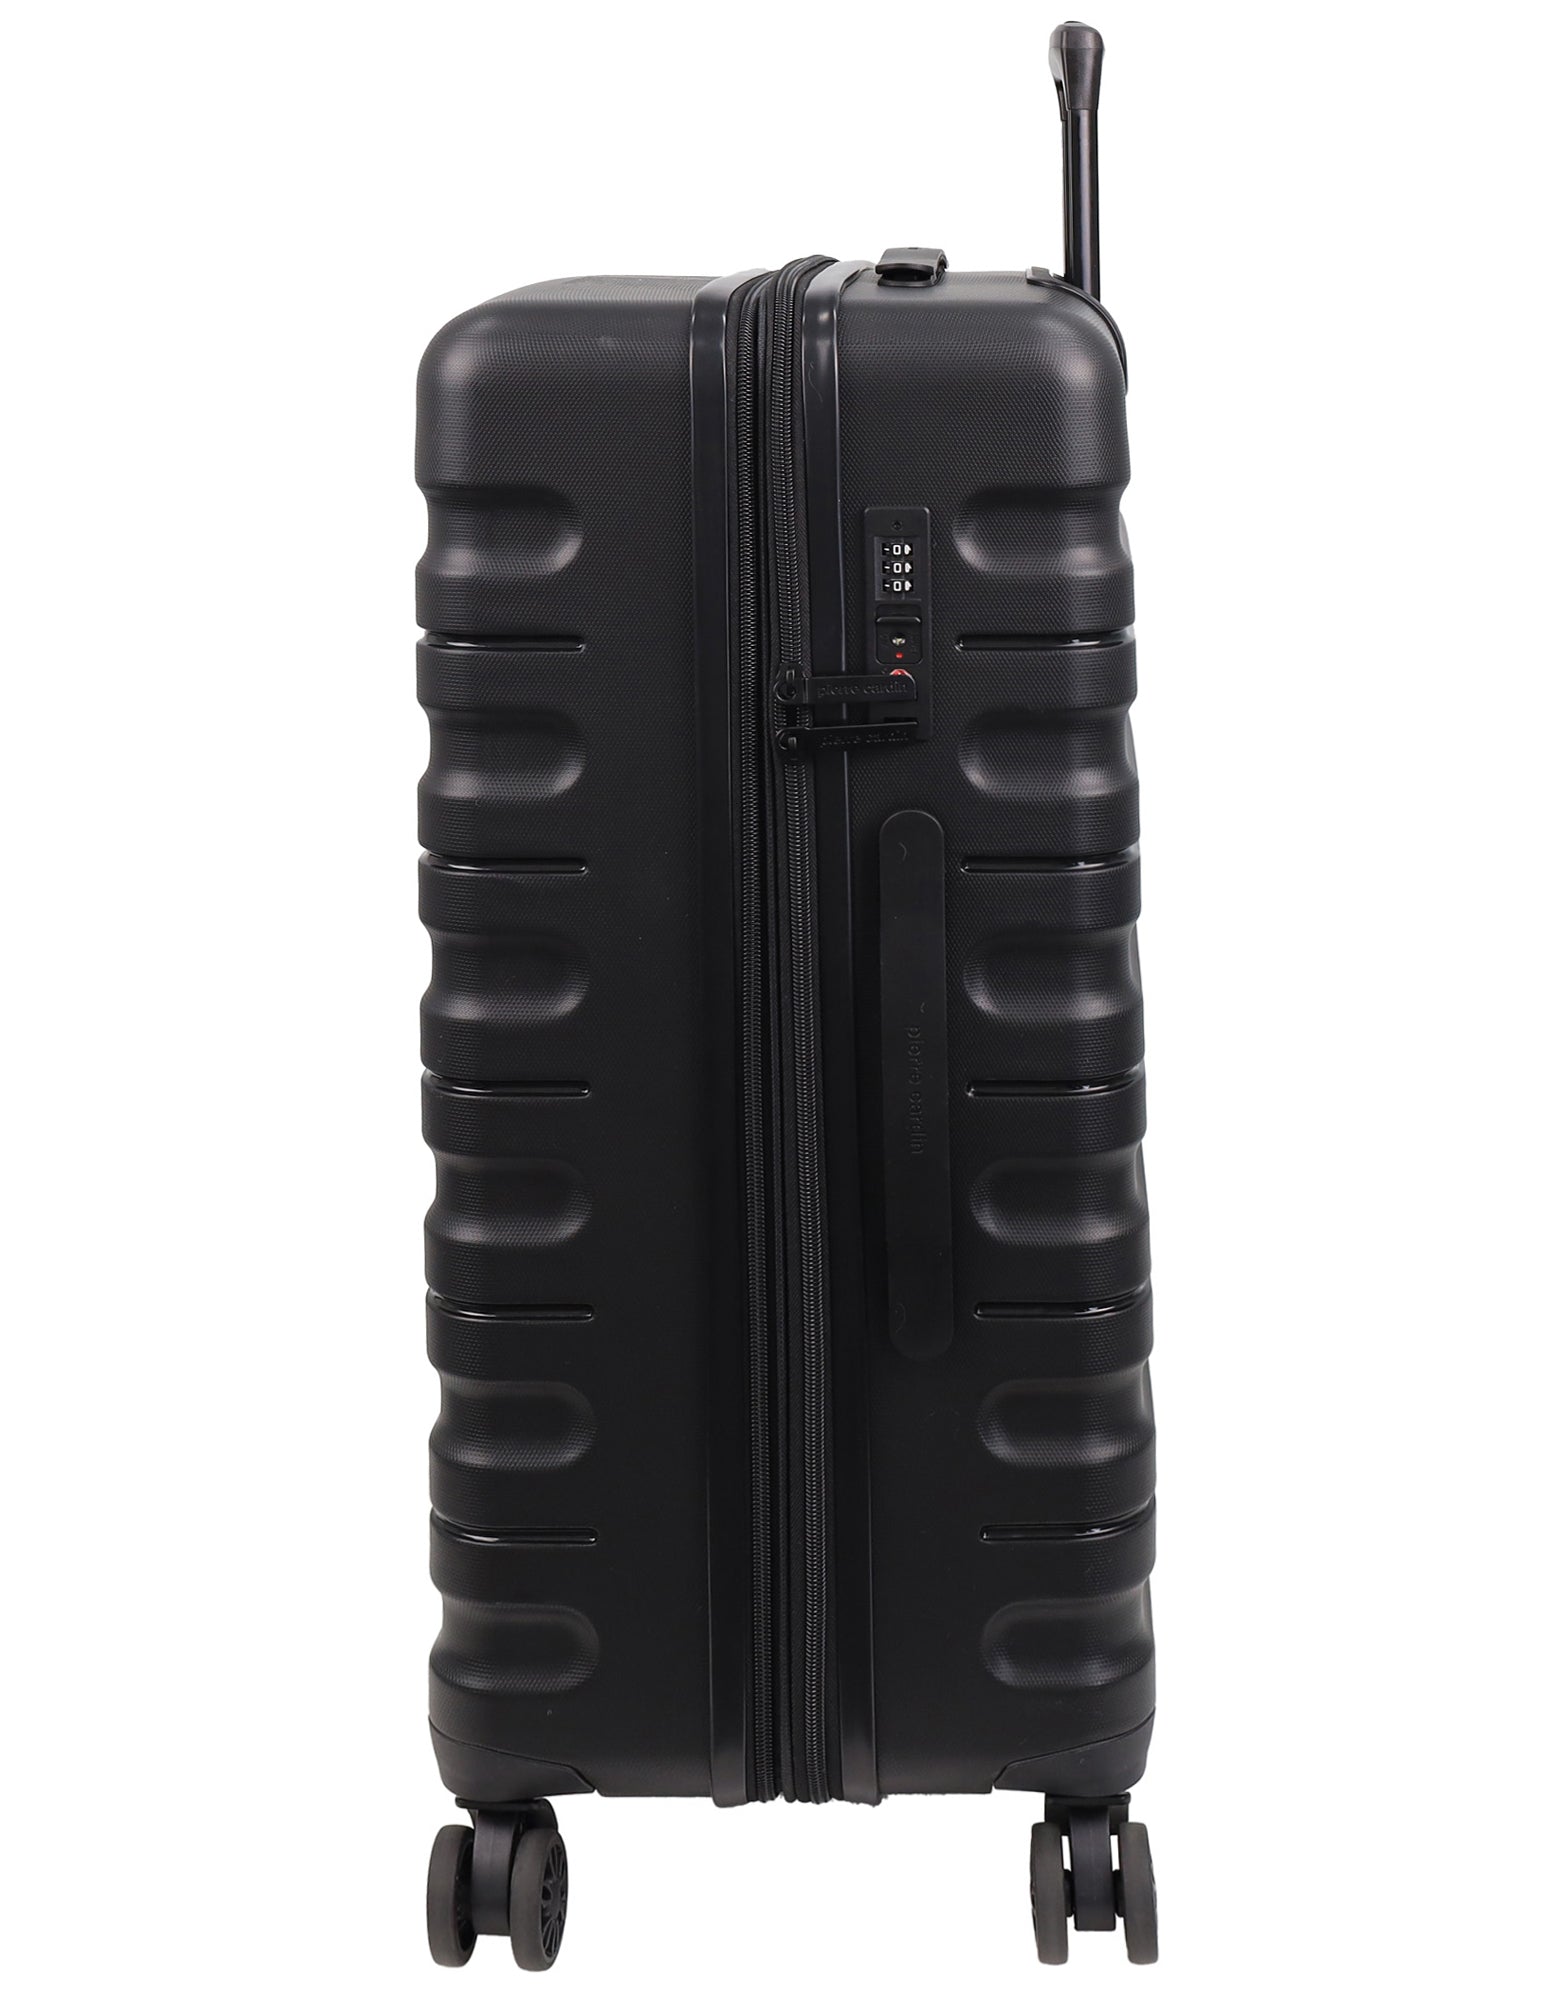 Pierre Cardin 80cm LARGE Hard Shell Suitcase in Rose